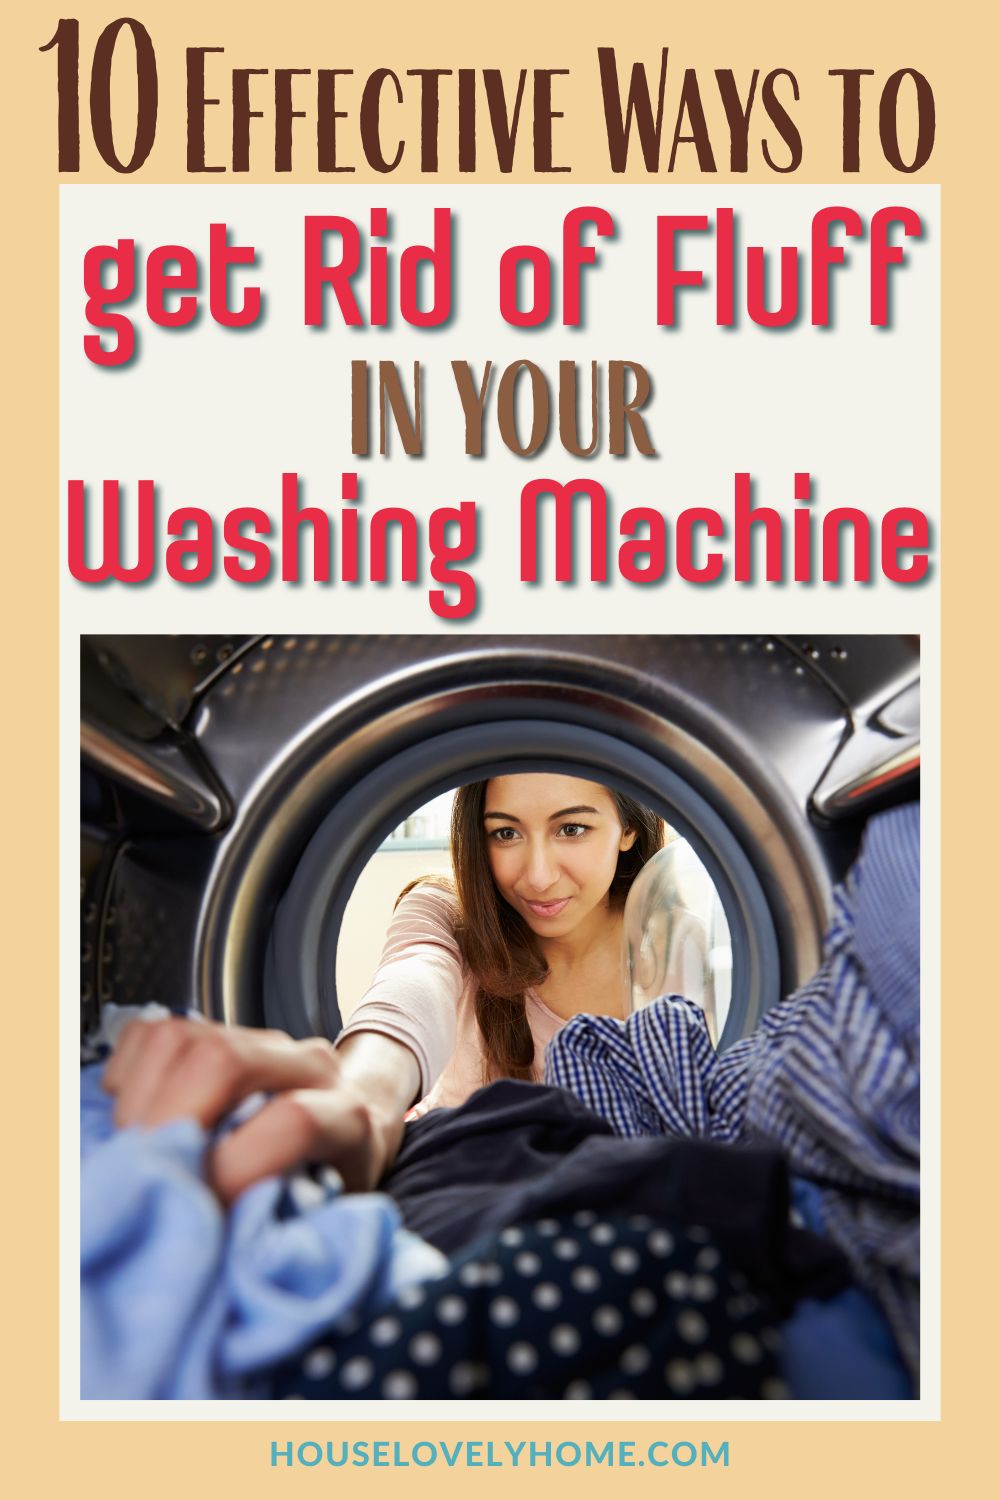 Effective Ways to Get Rid of Fluff in Your Washing Machine Pin Image